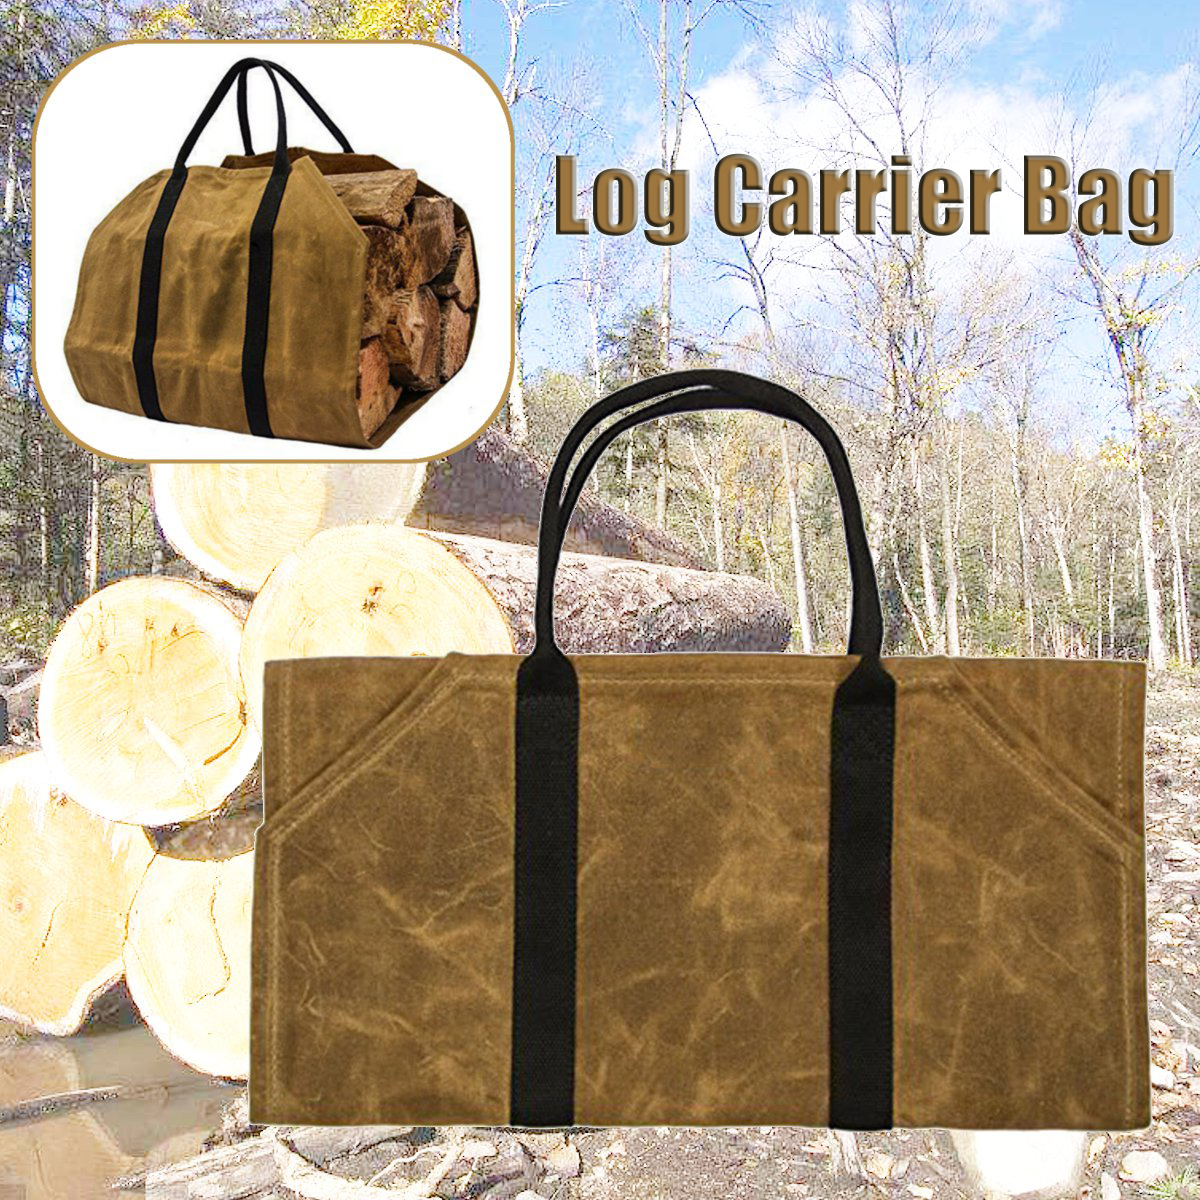 khaki-Firewood-Carrier-Log-Carrier-Wood-Carrying-Tool-Bag-for-Fireplace-Waxed-Canvas-1388831-2